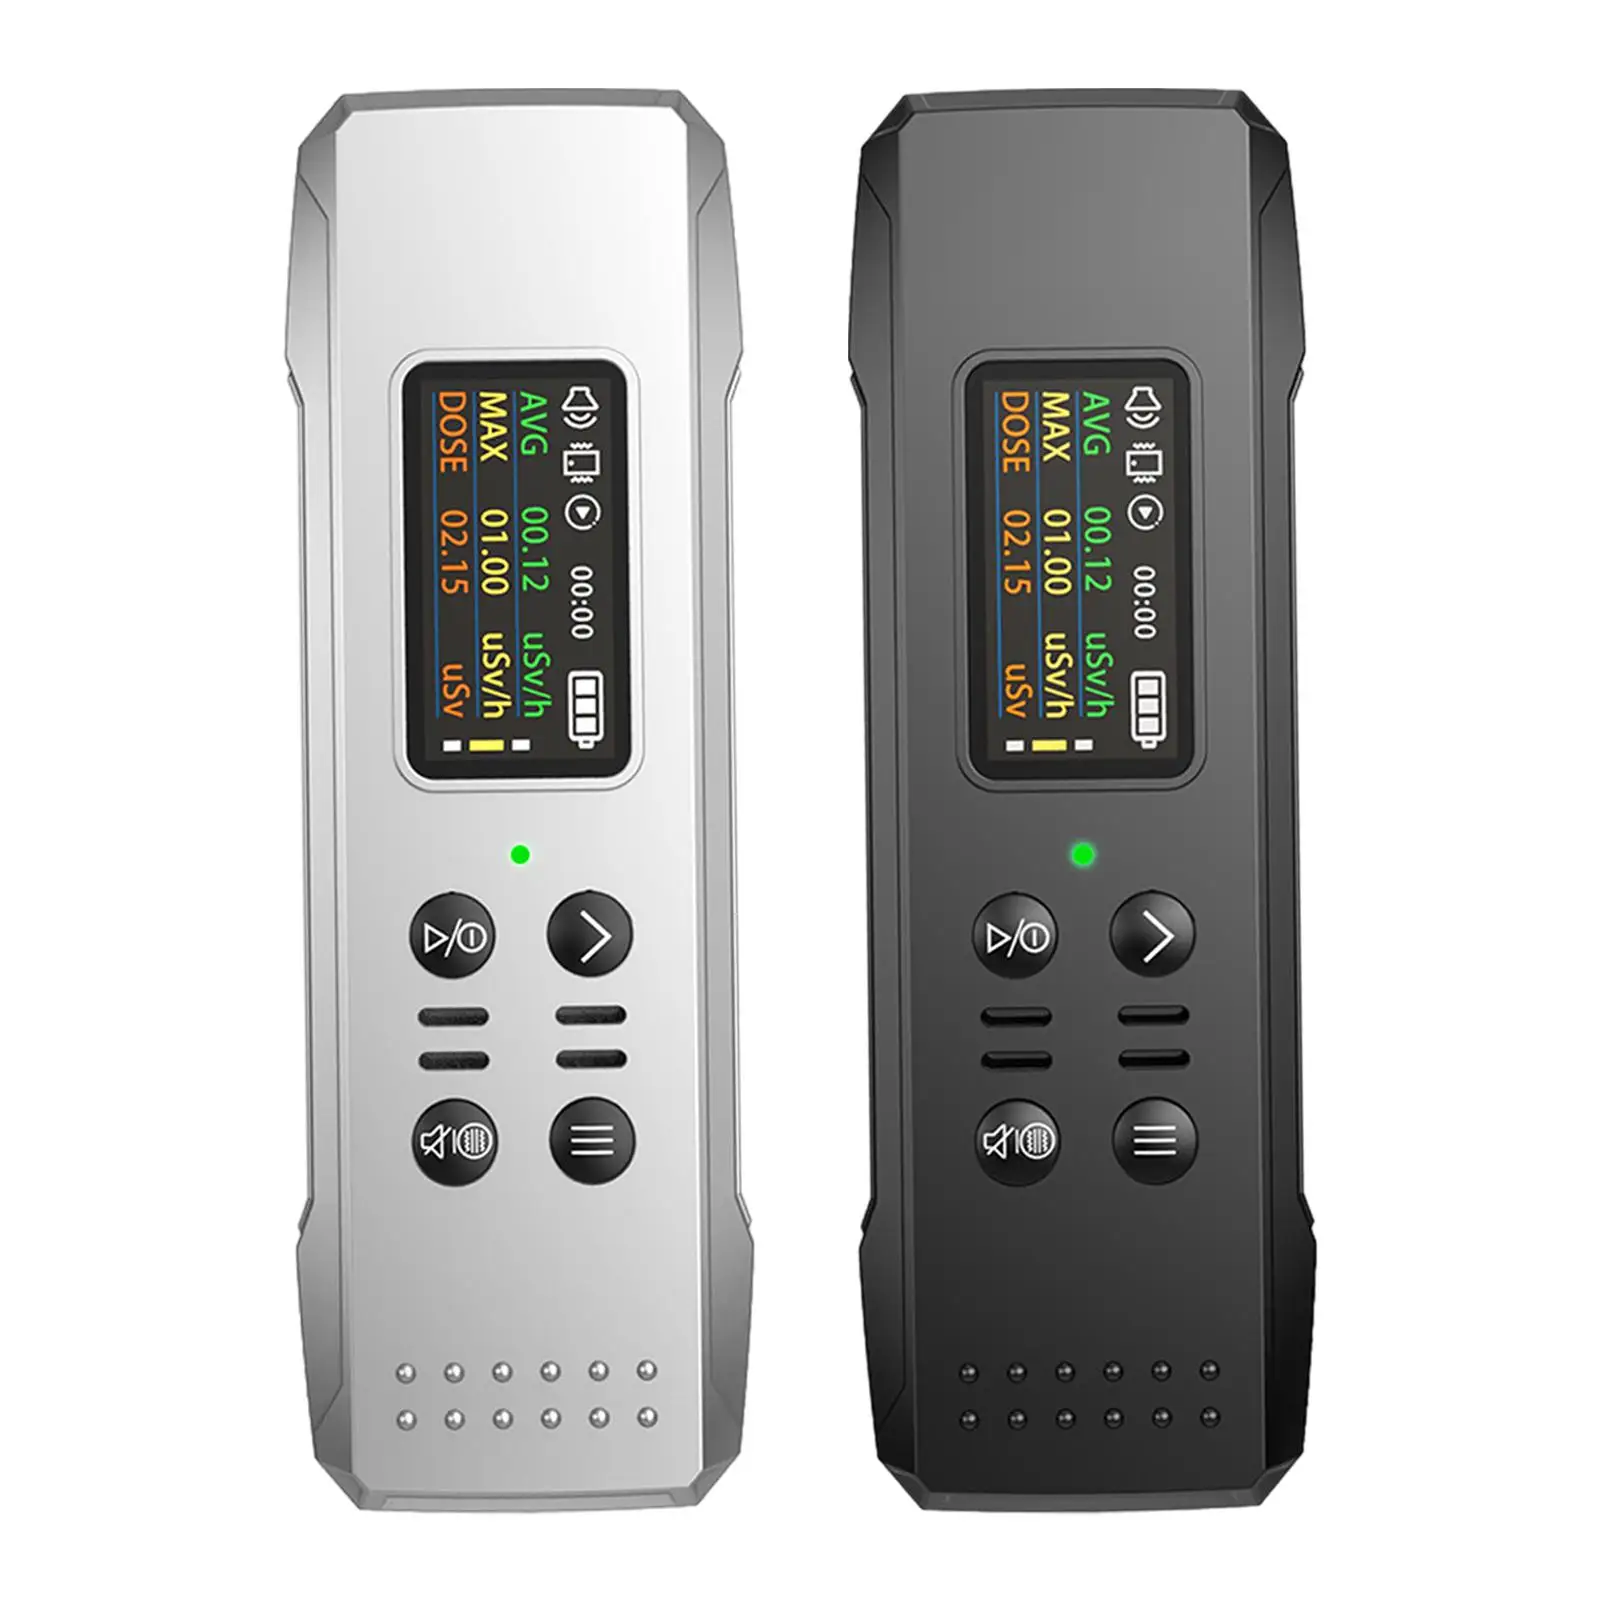 Geiger Counter Nuclear Radiation Monitor Three Alarm Modes Portable Radiation Meter for Prevention Household Personal Use